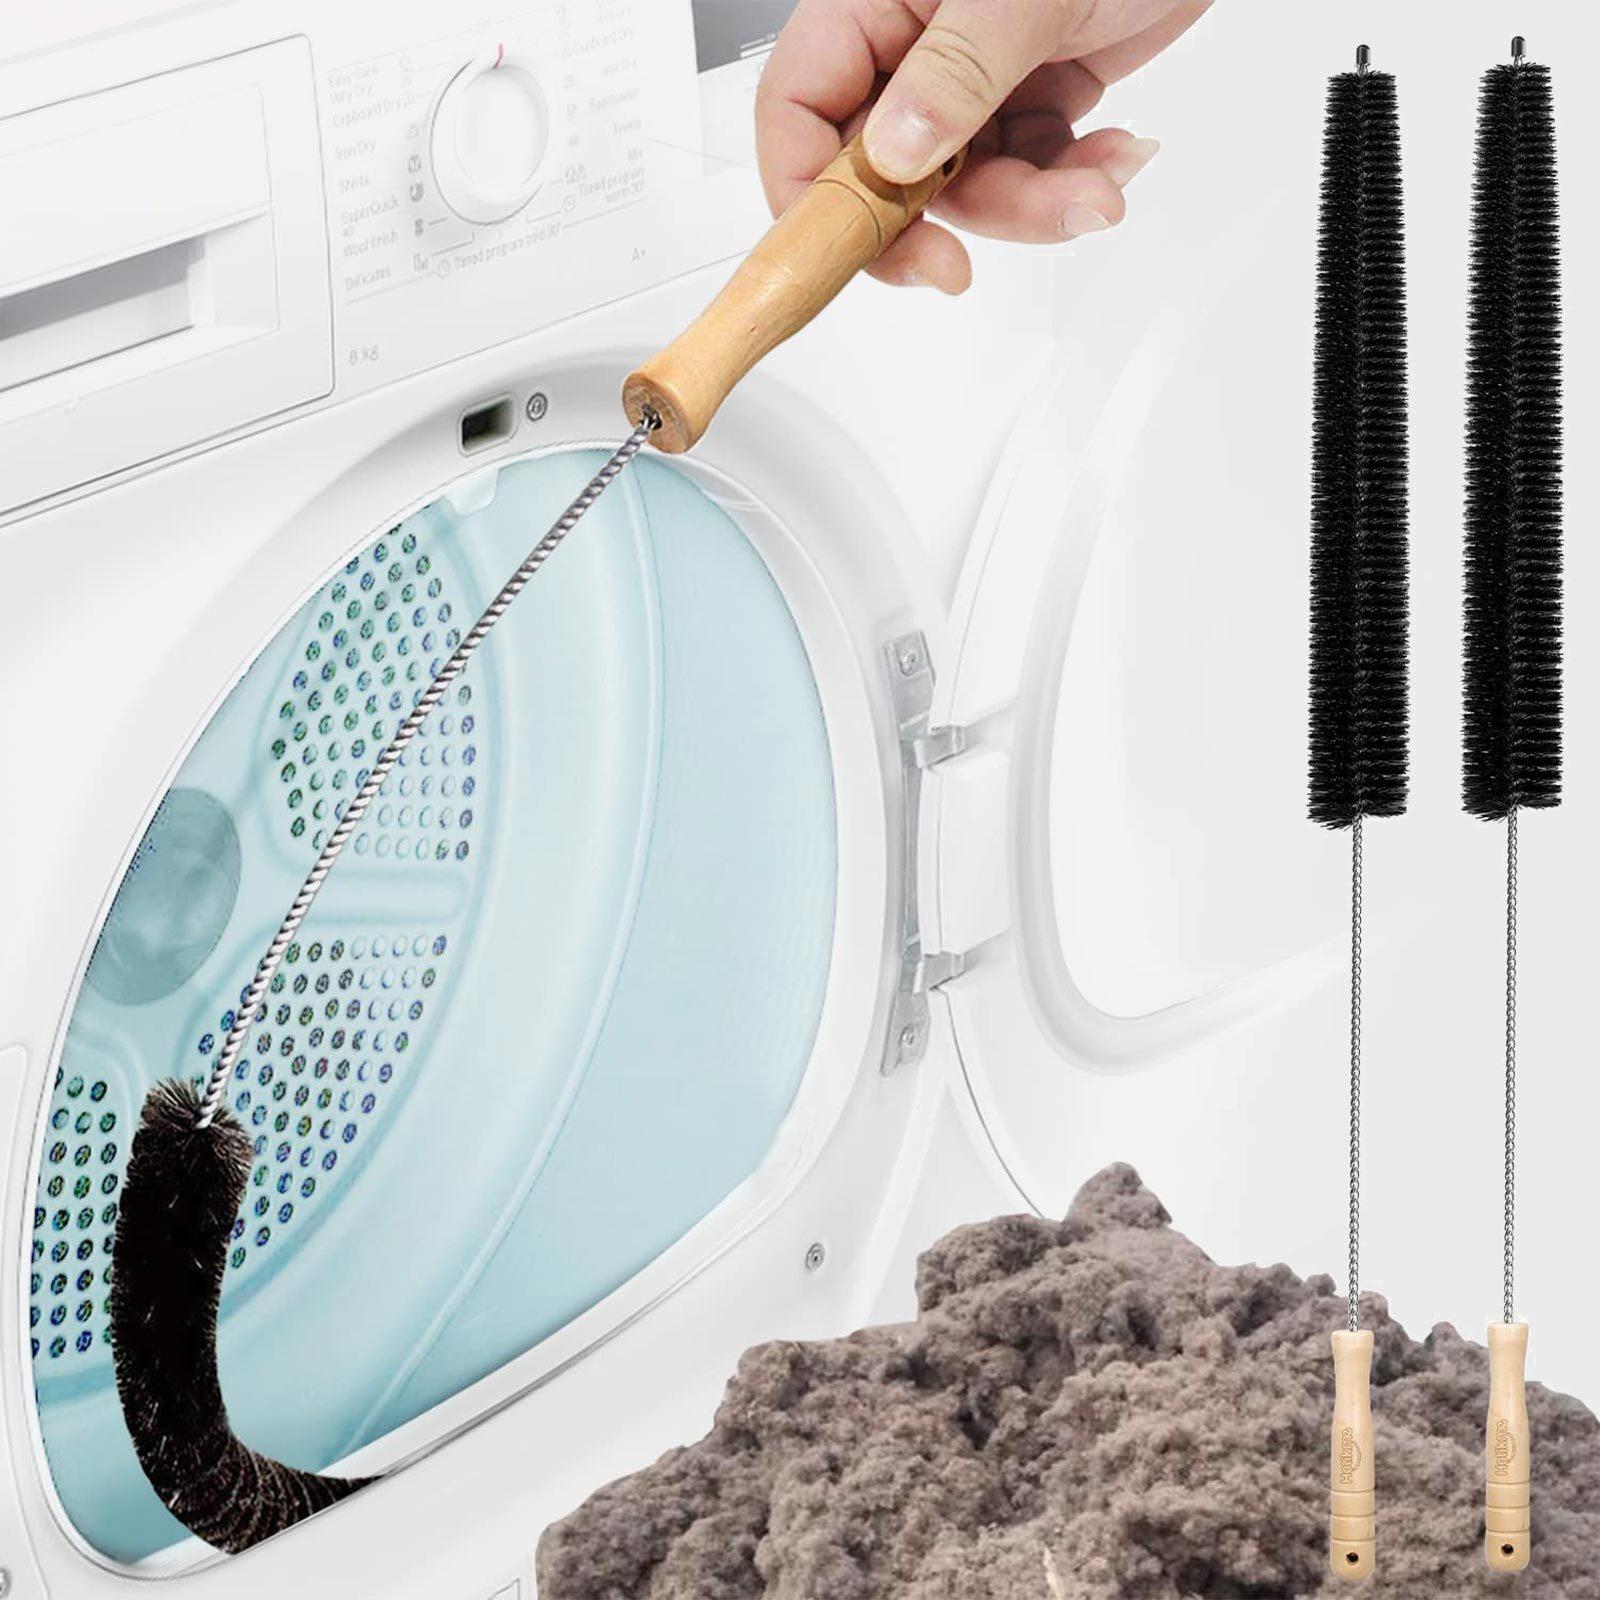 Laundry Hair and Lint Catcher Review: Do They Work? 